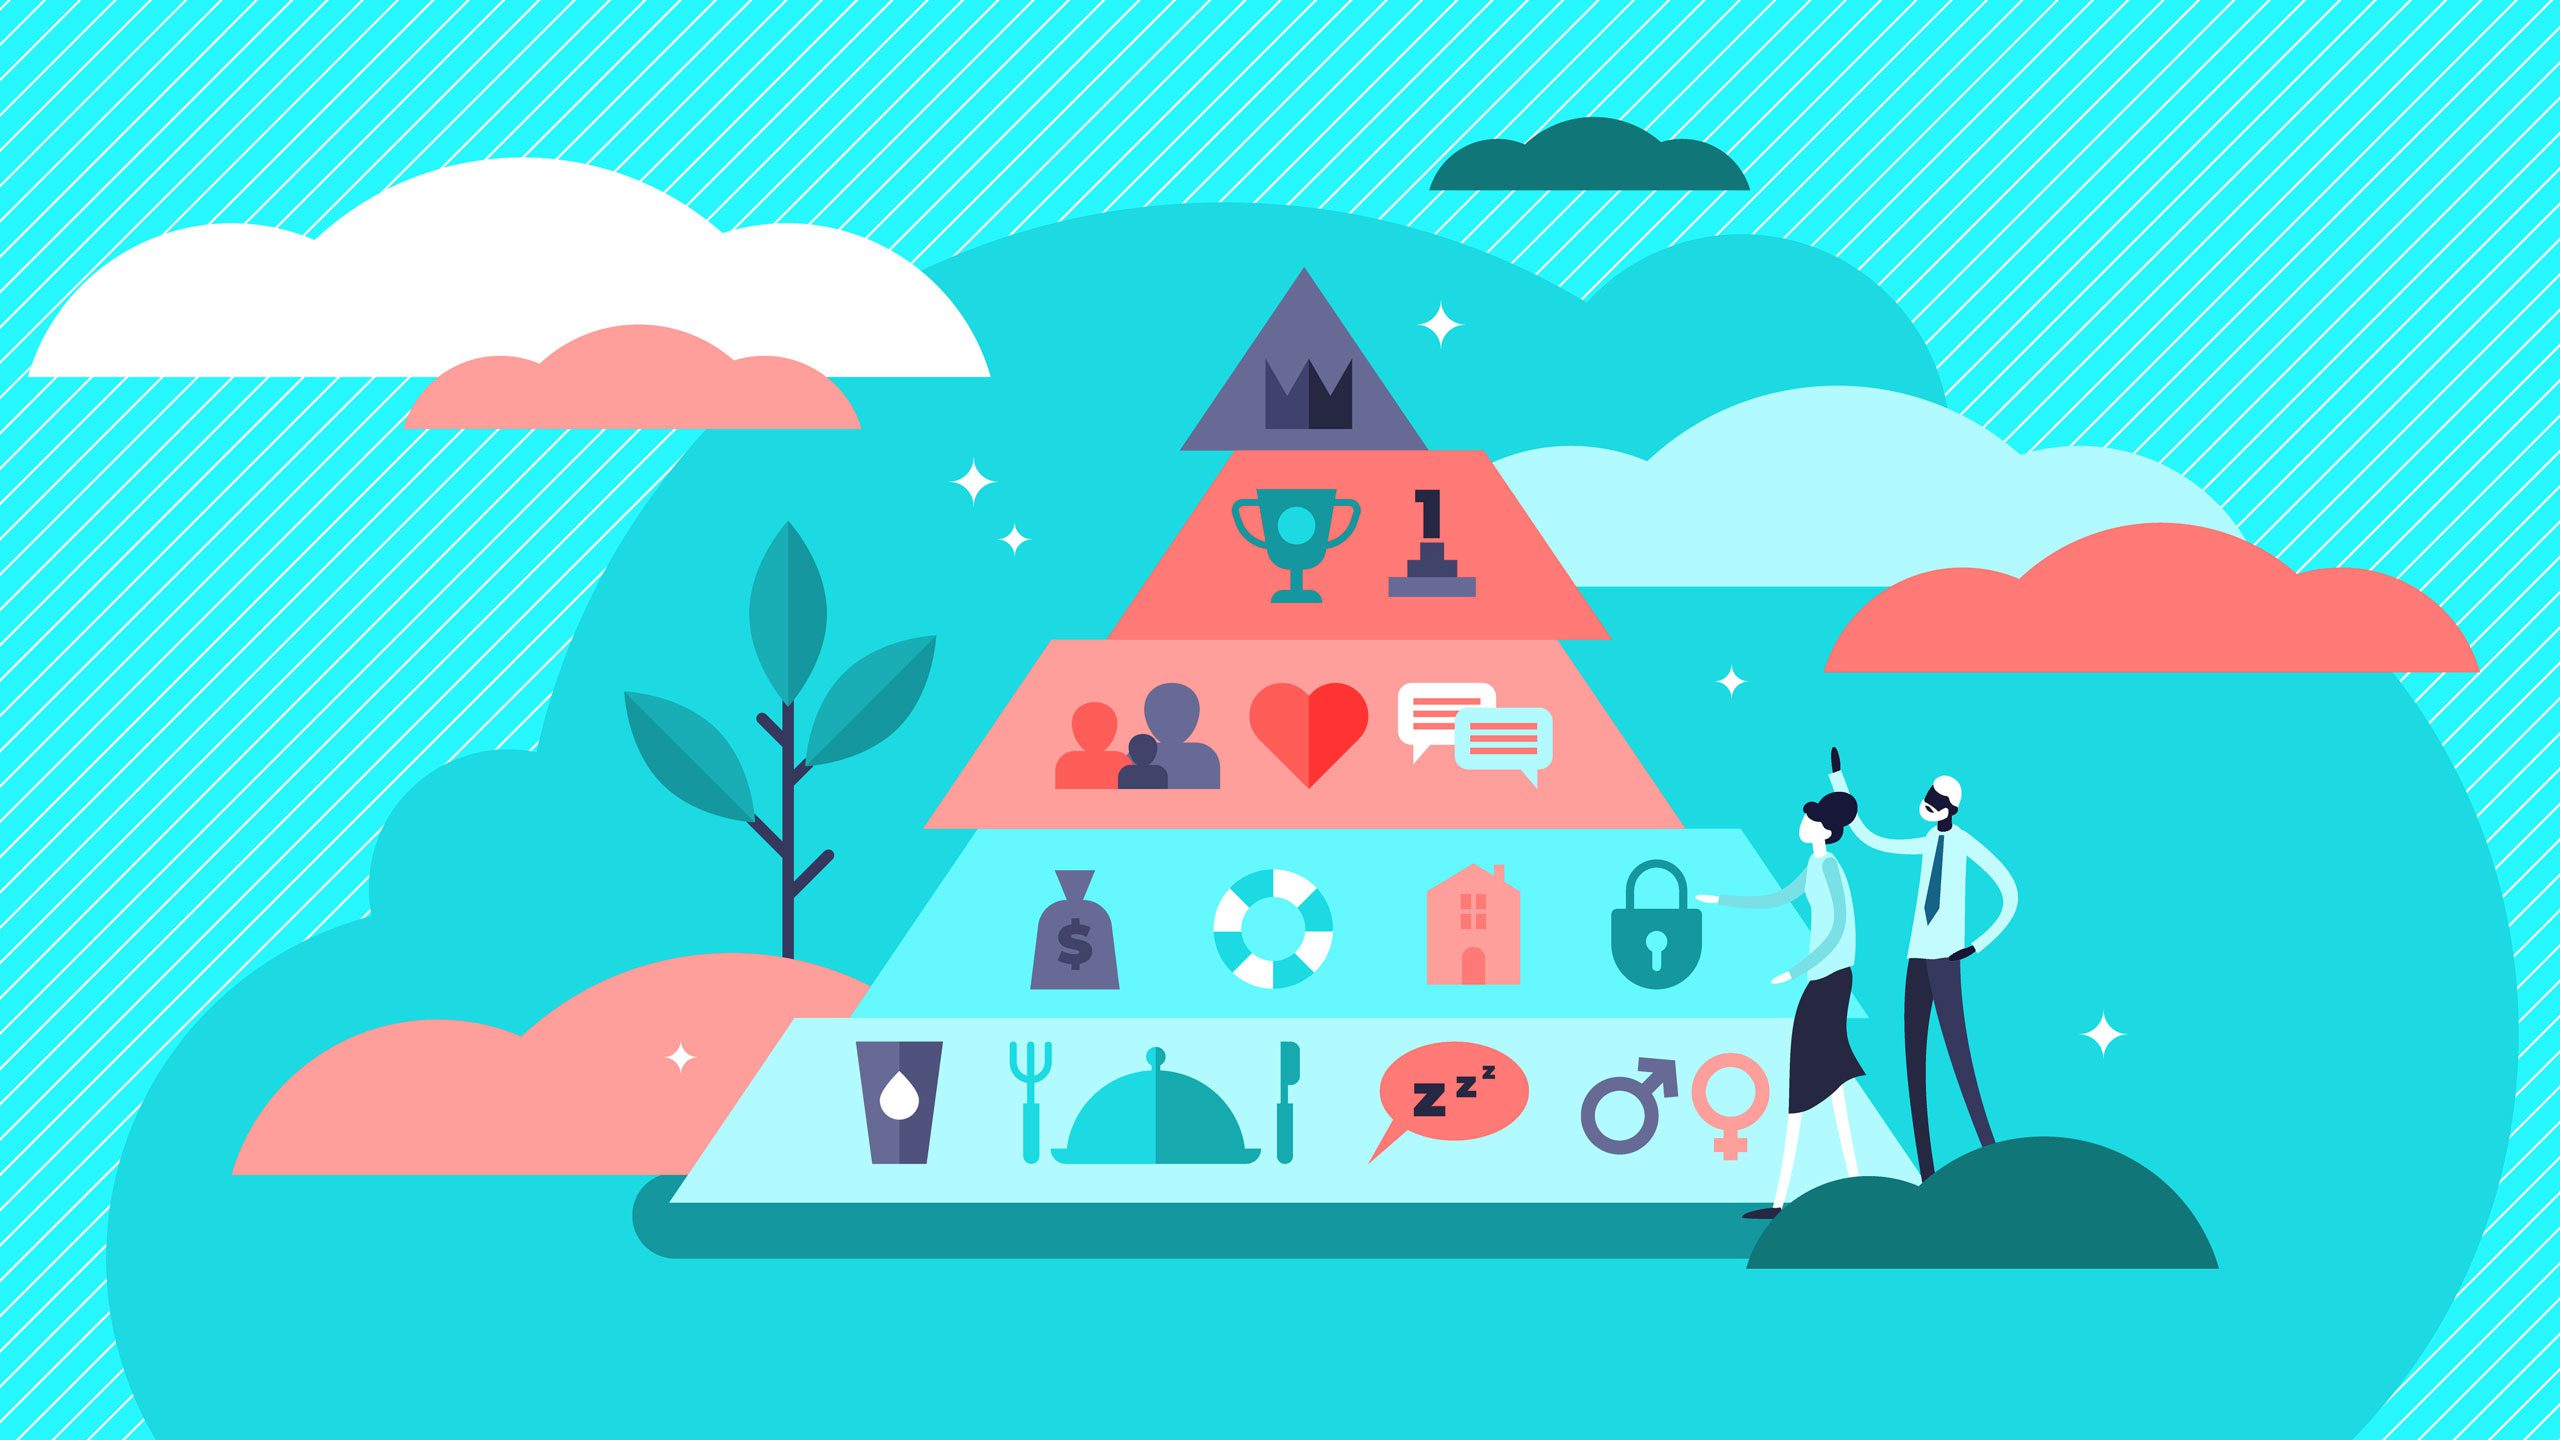 Maslow's hierarchy stock illustration including basic needs